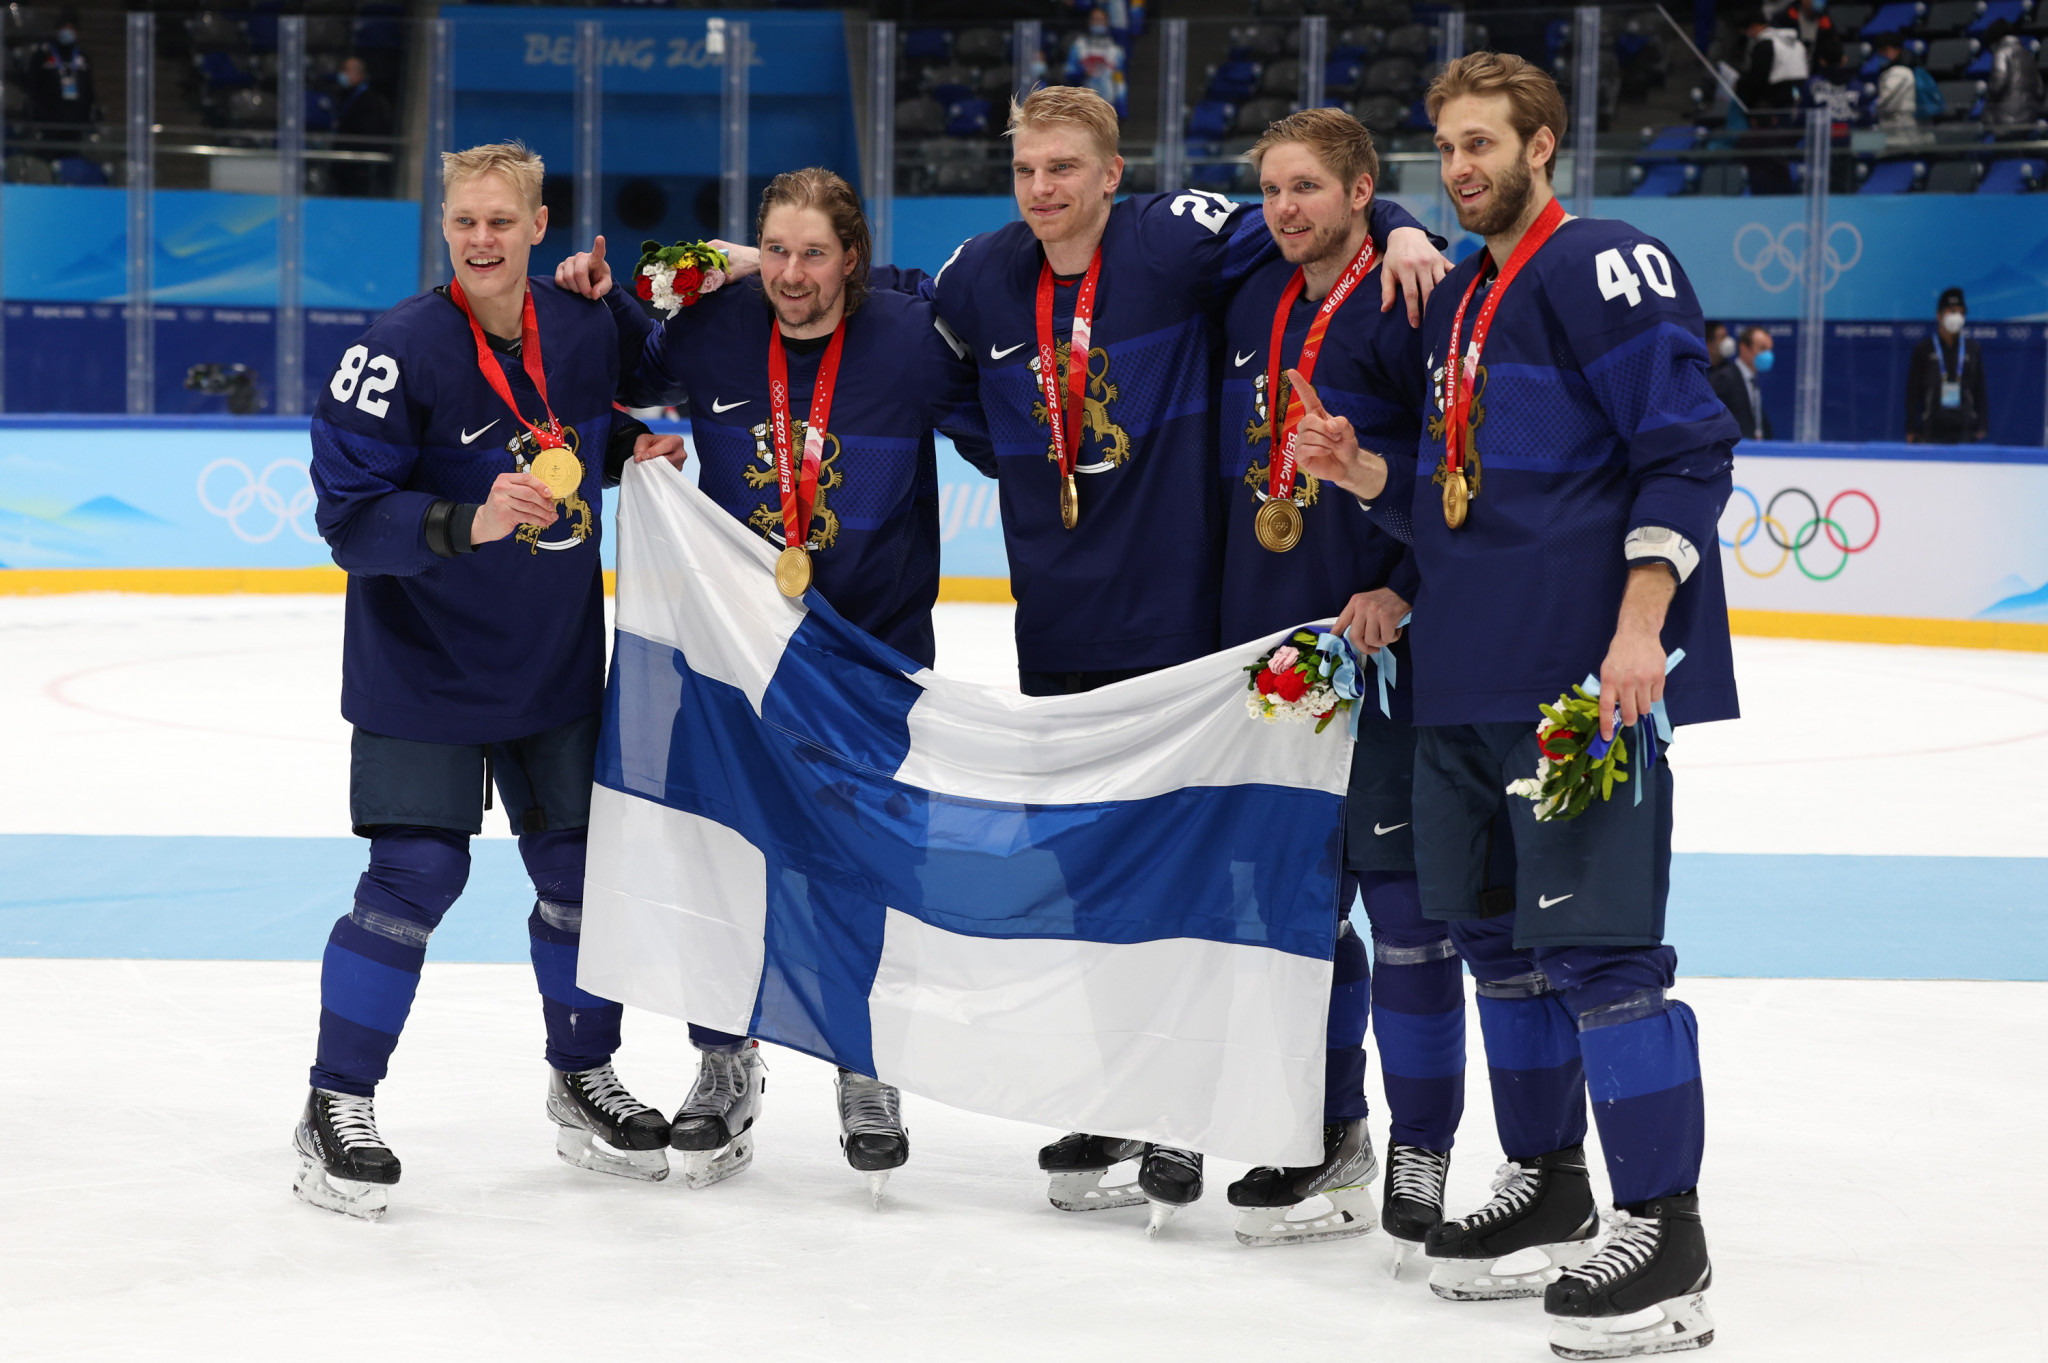 Finland won Olympic ice hockey gold at Beijing 2022  ©Getty Images